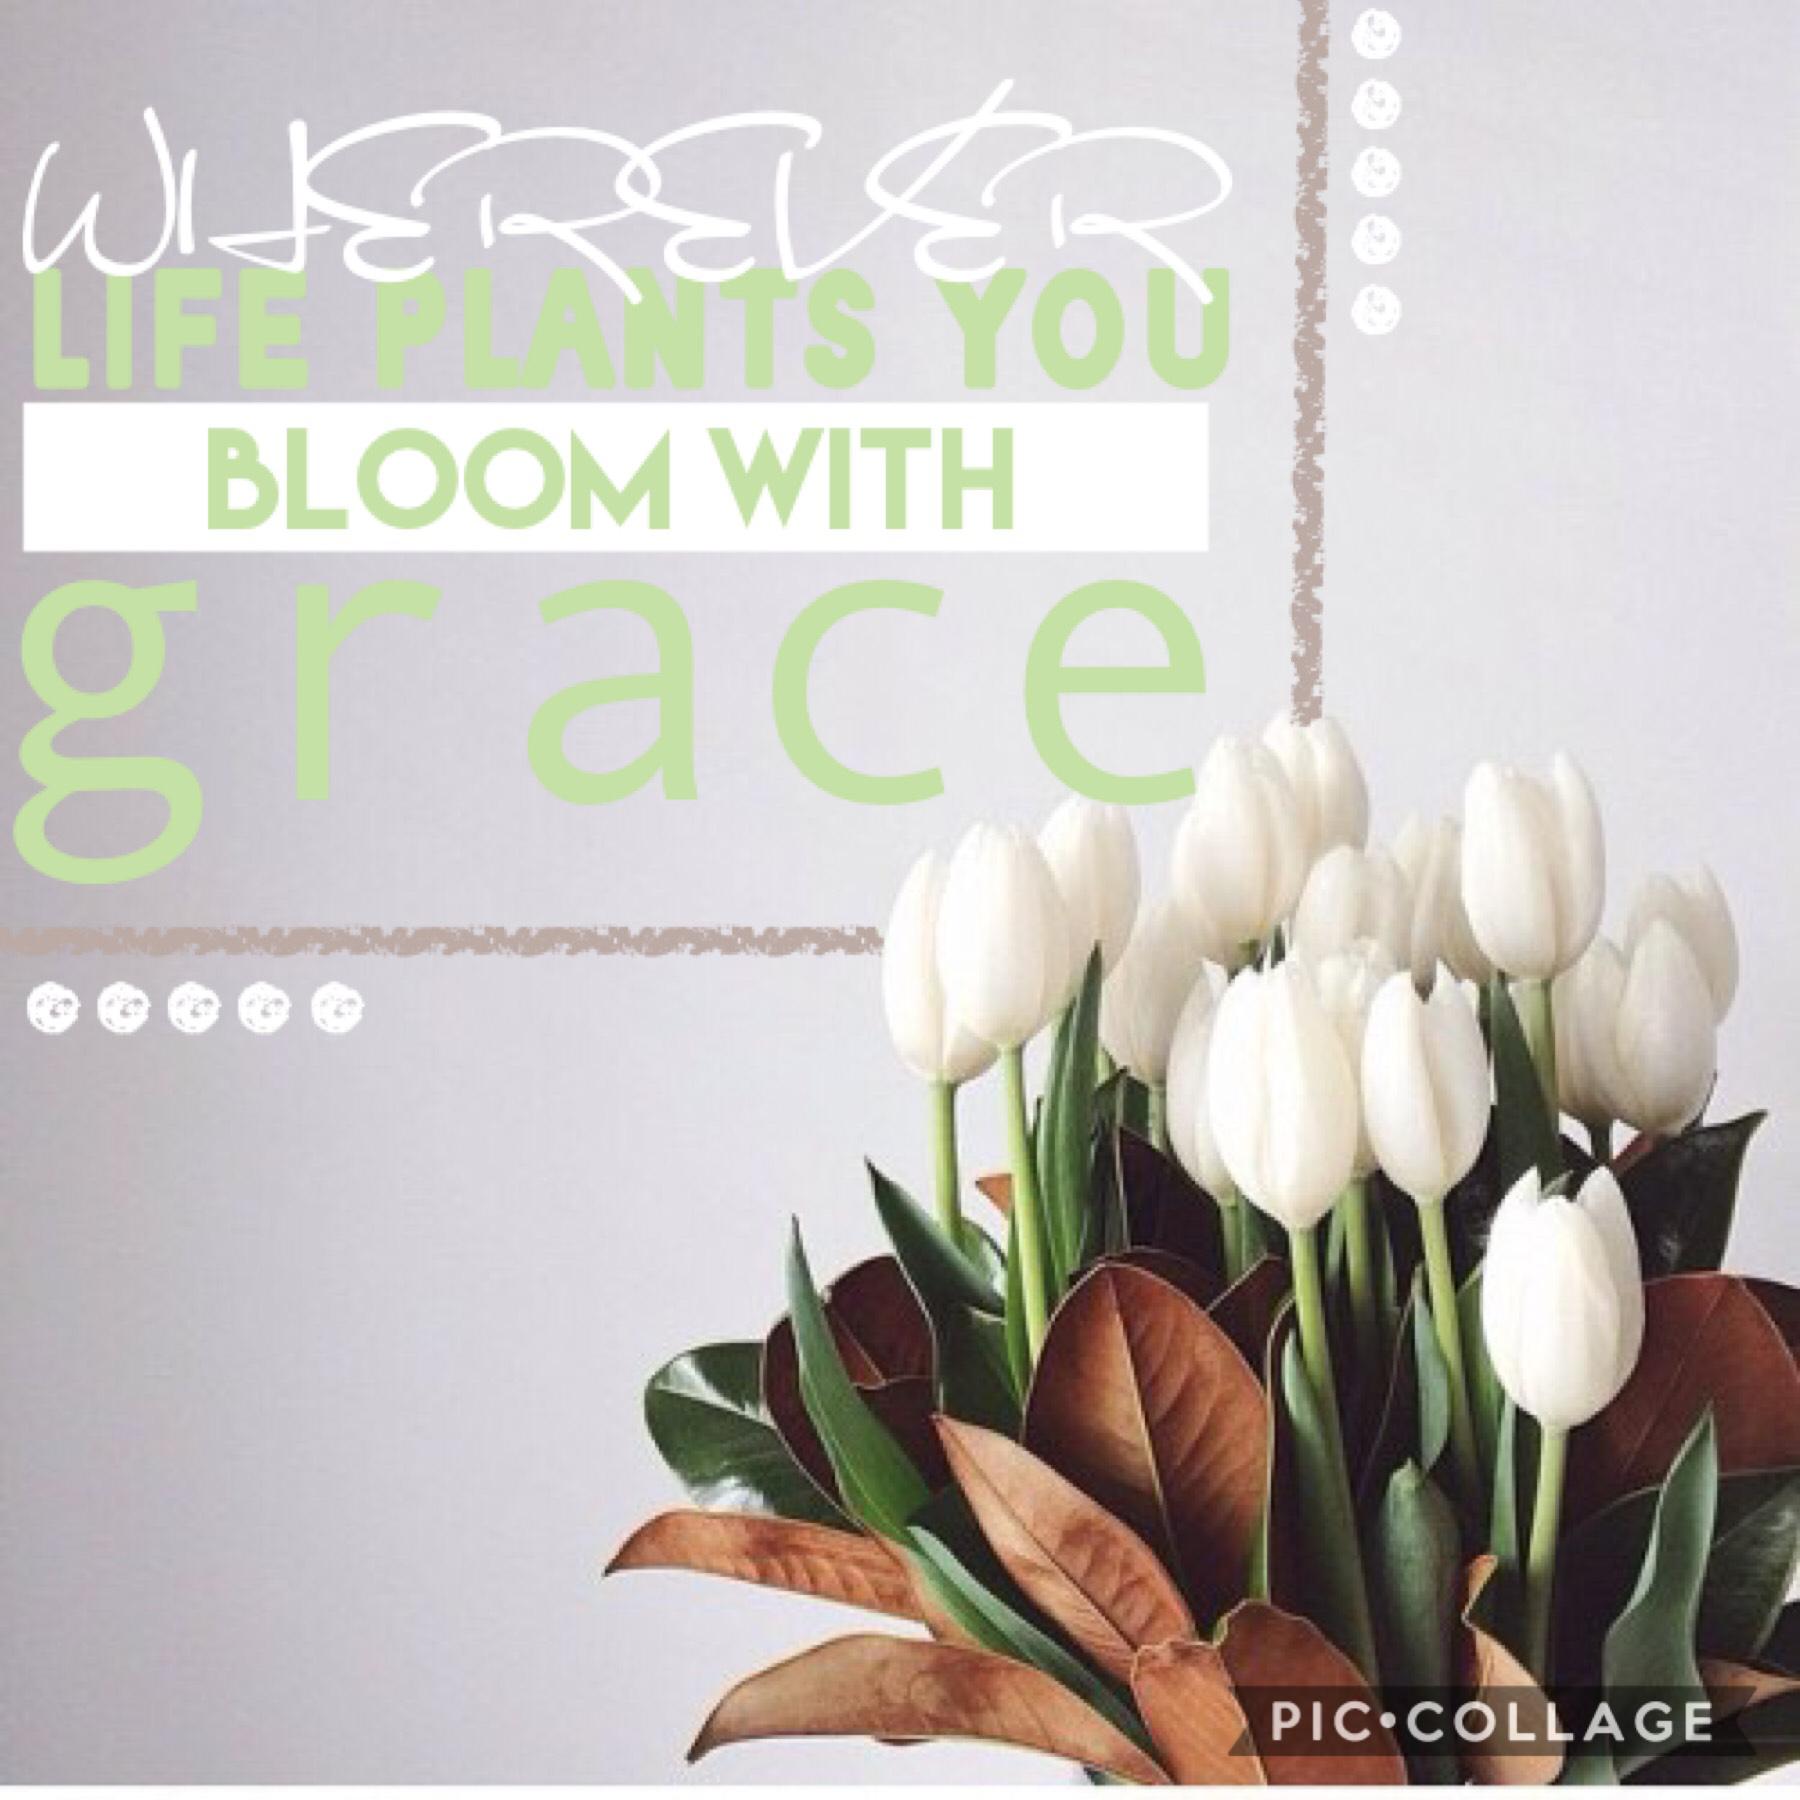 Wherever life plants you bloom with grace 🌱 comment what you think X